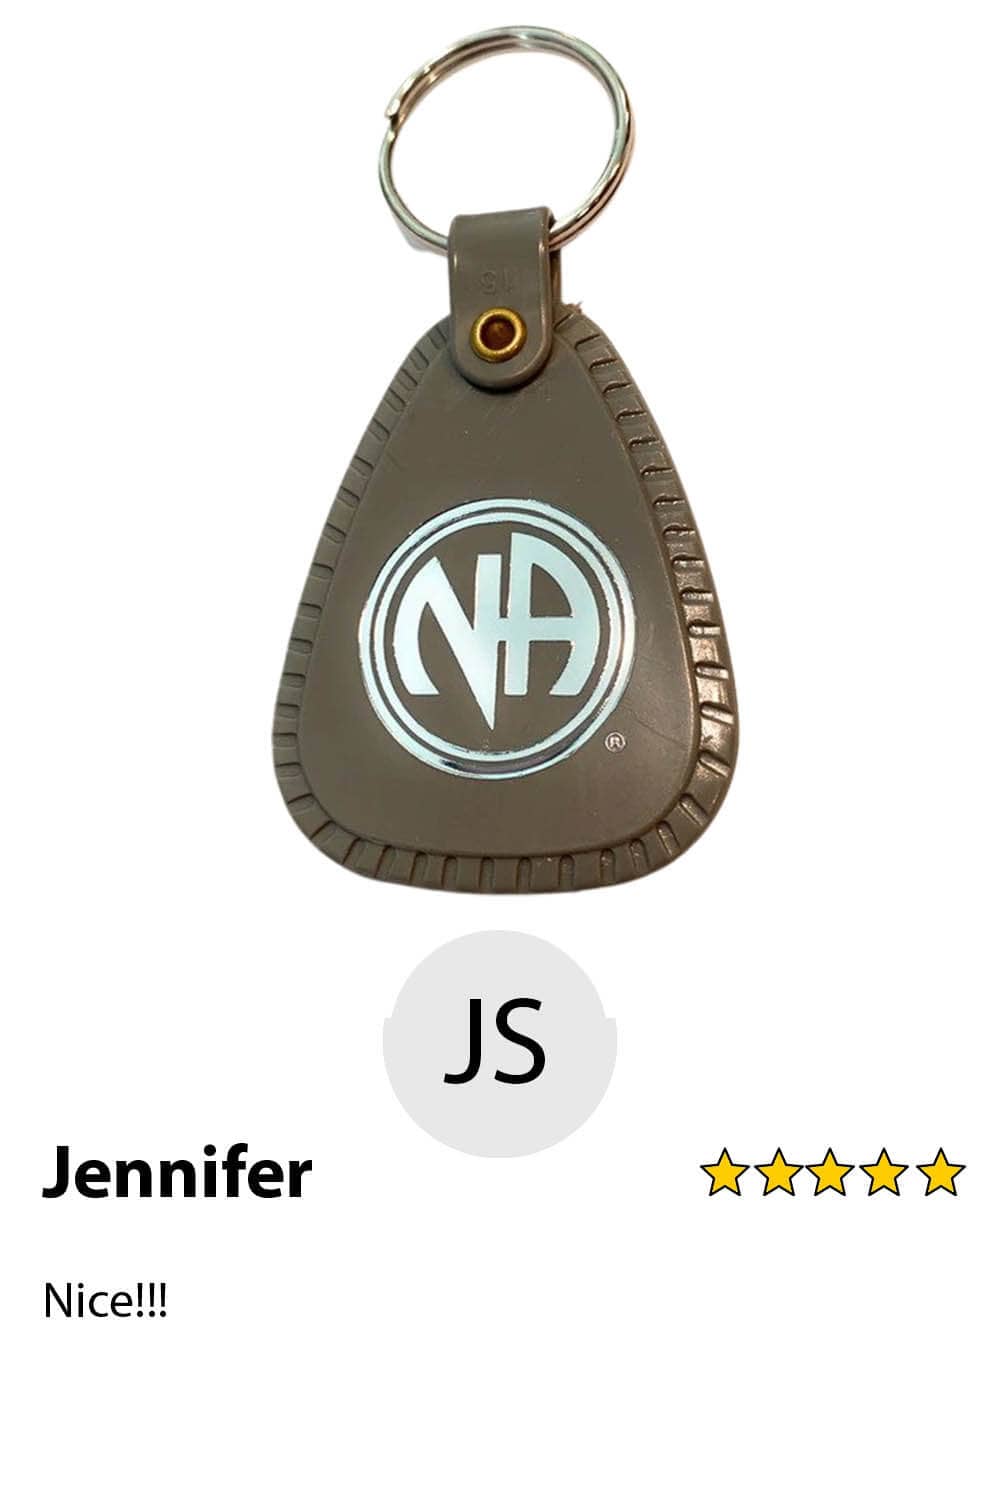 A brown leather key chain with the initials of jennifer.